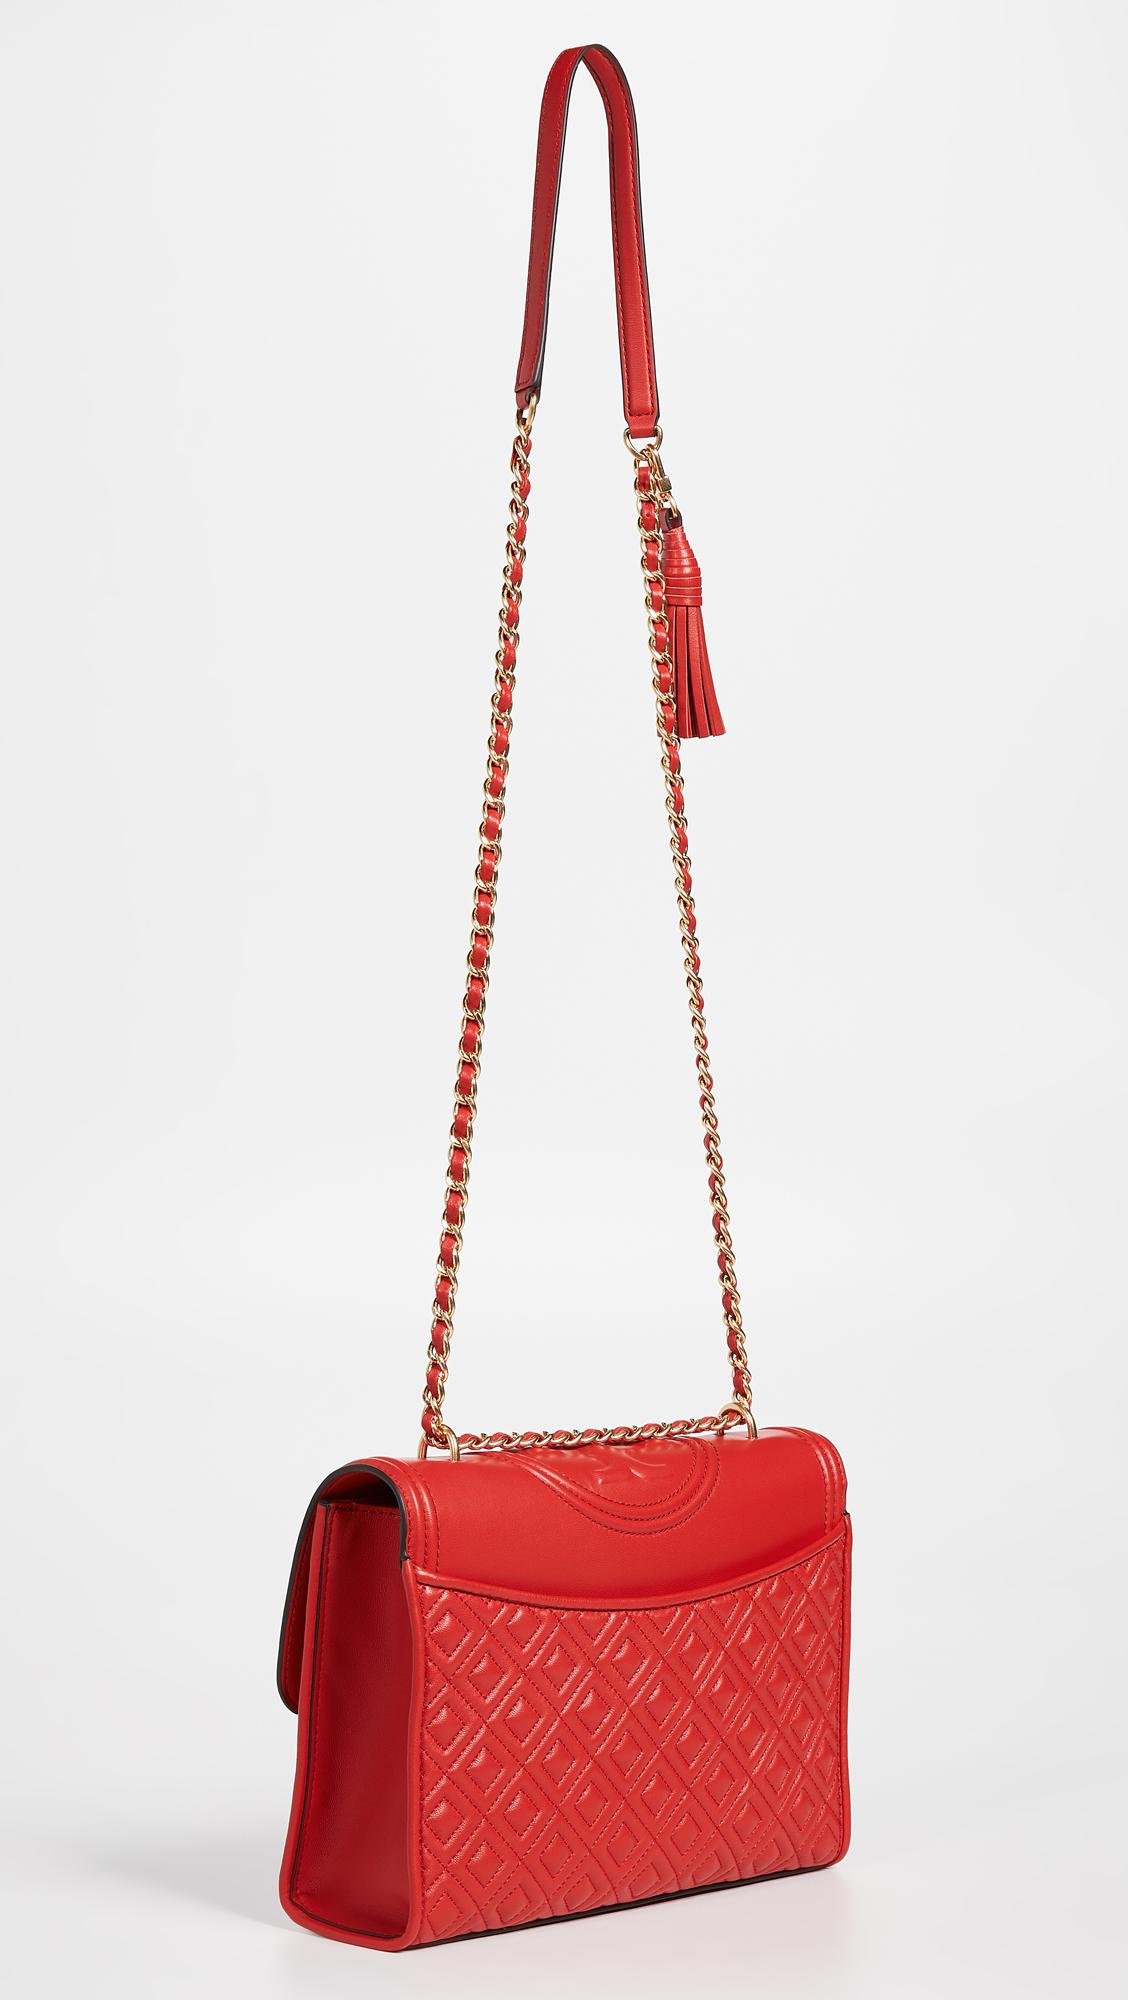 Tory Burch Fleming Small Convertible Leather Shoulder Bag- Red